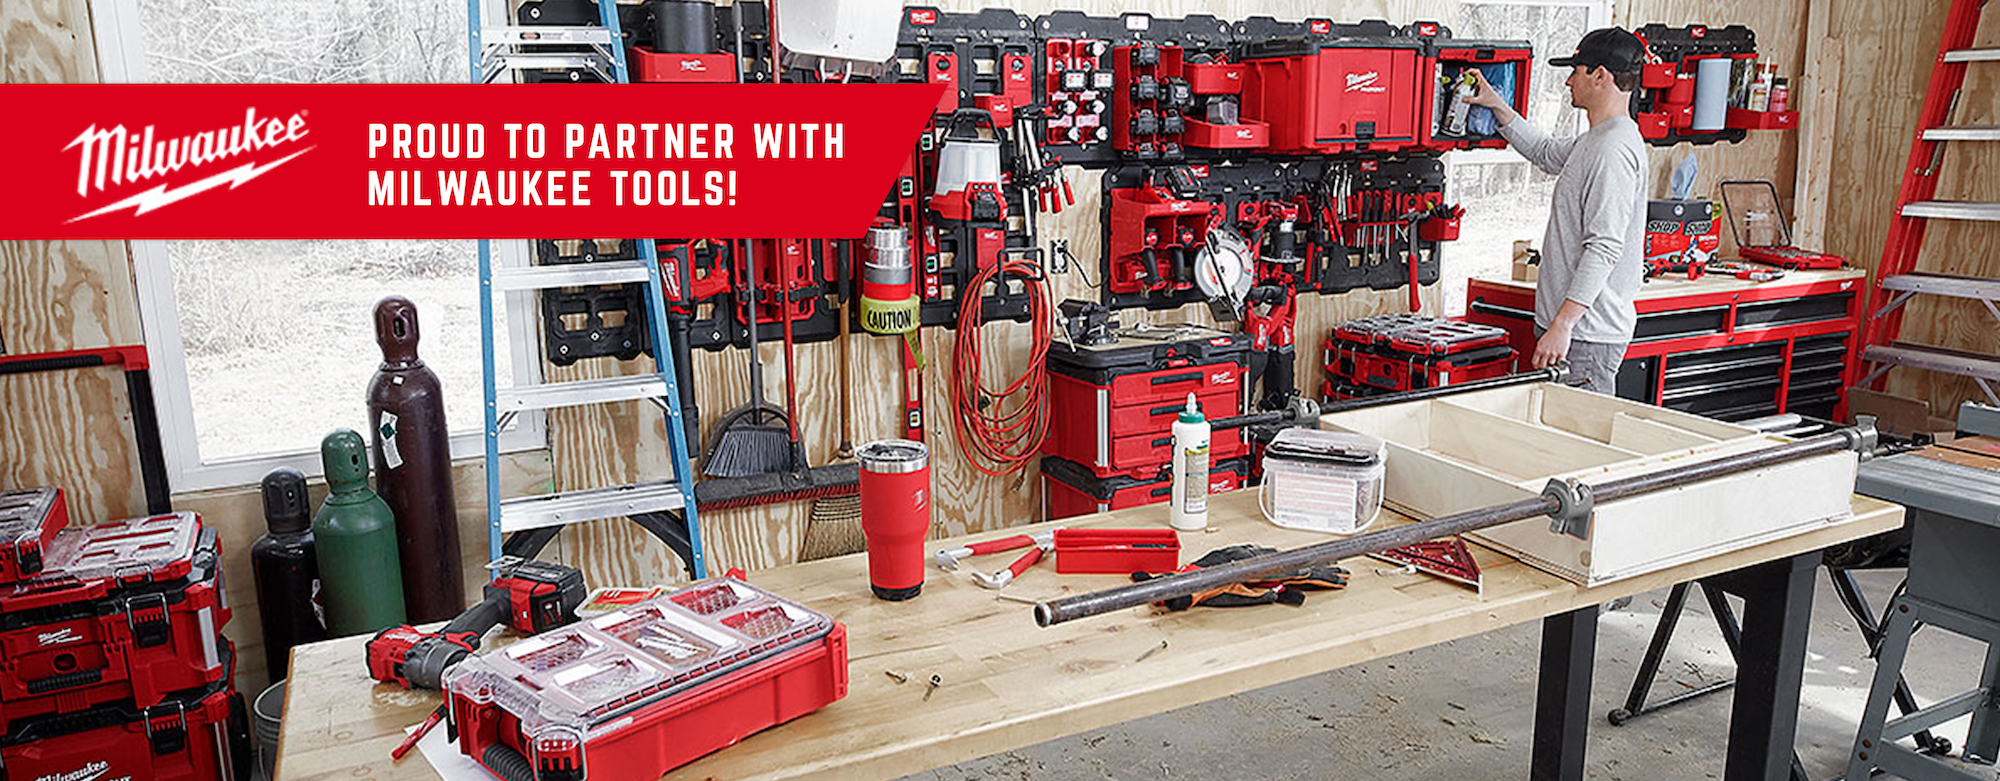 Proud to Partner with Milwaukee Tools!